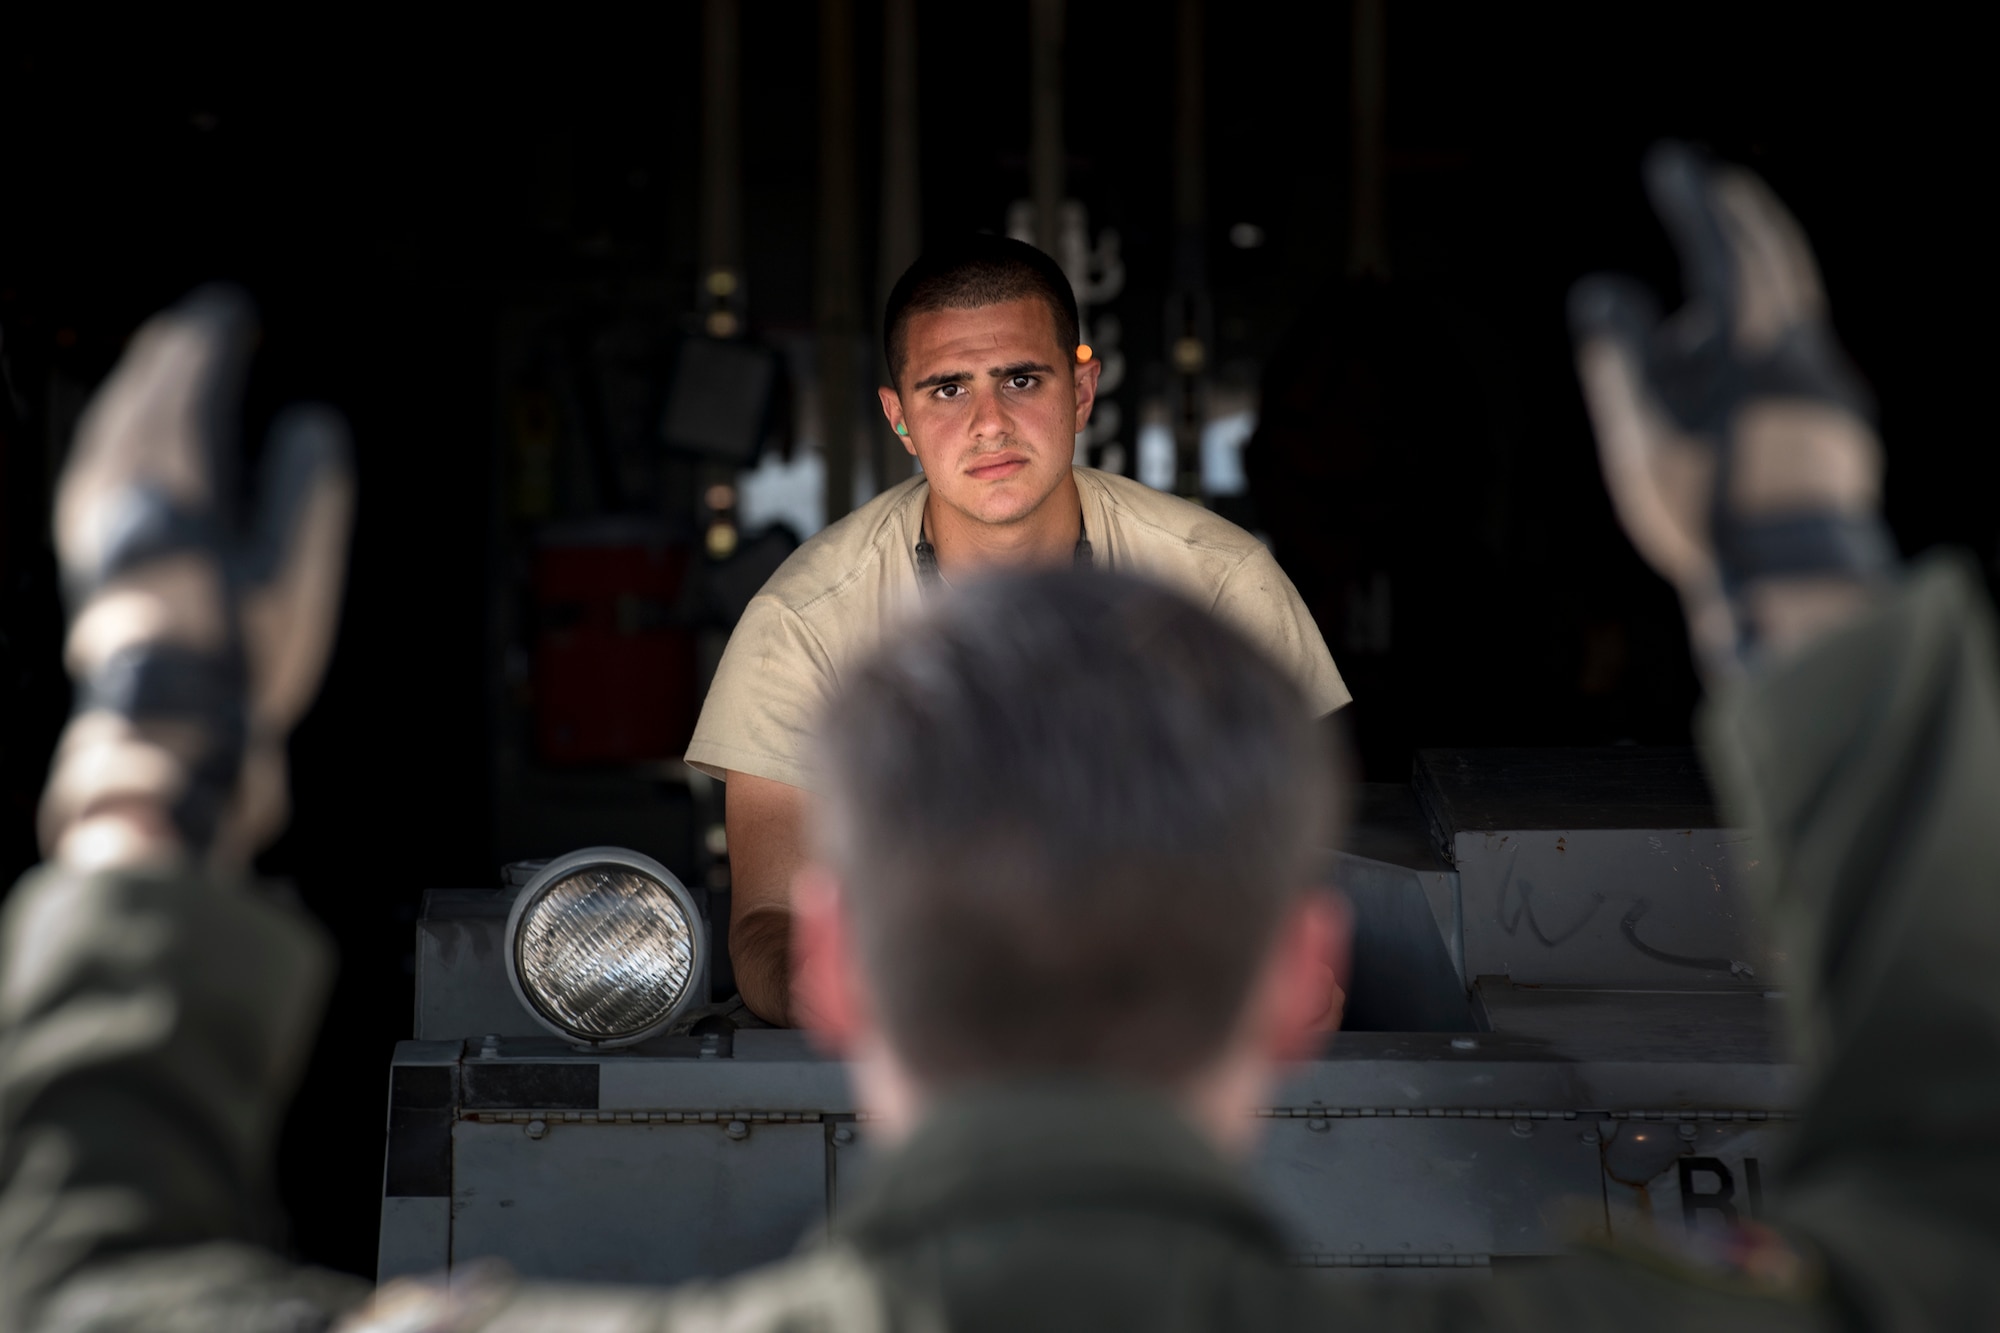 A weapons Airman from the 325th Fighter Wing looks toward a loadmaster from the 71st Rescue Squadron while loading equipment onto an HC-130J Combat King II, Aug. 9, 2017, at Tyndall Air Force Base, Fla.